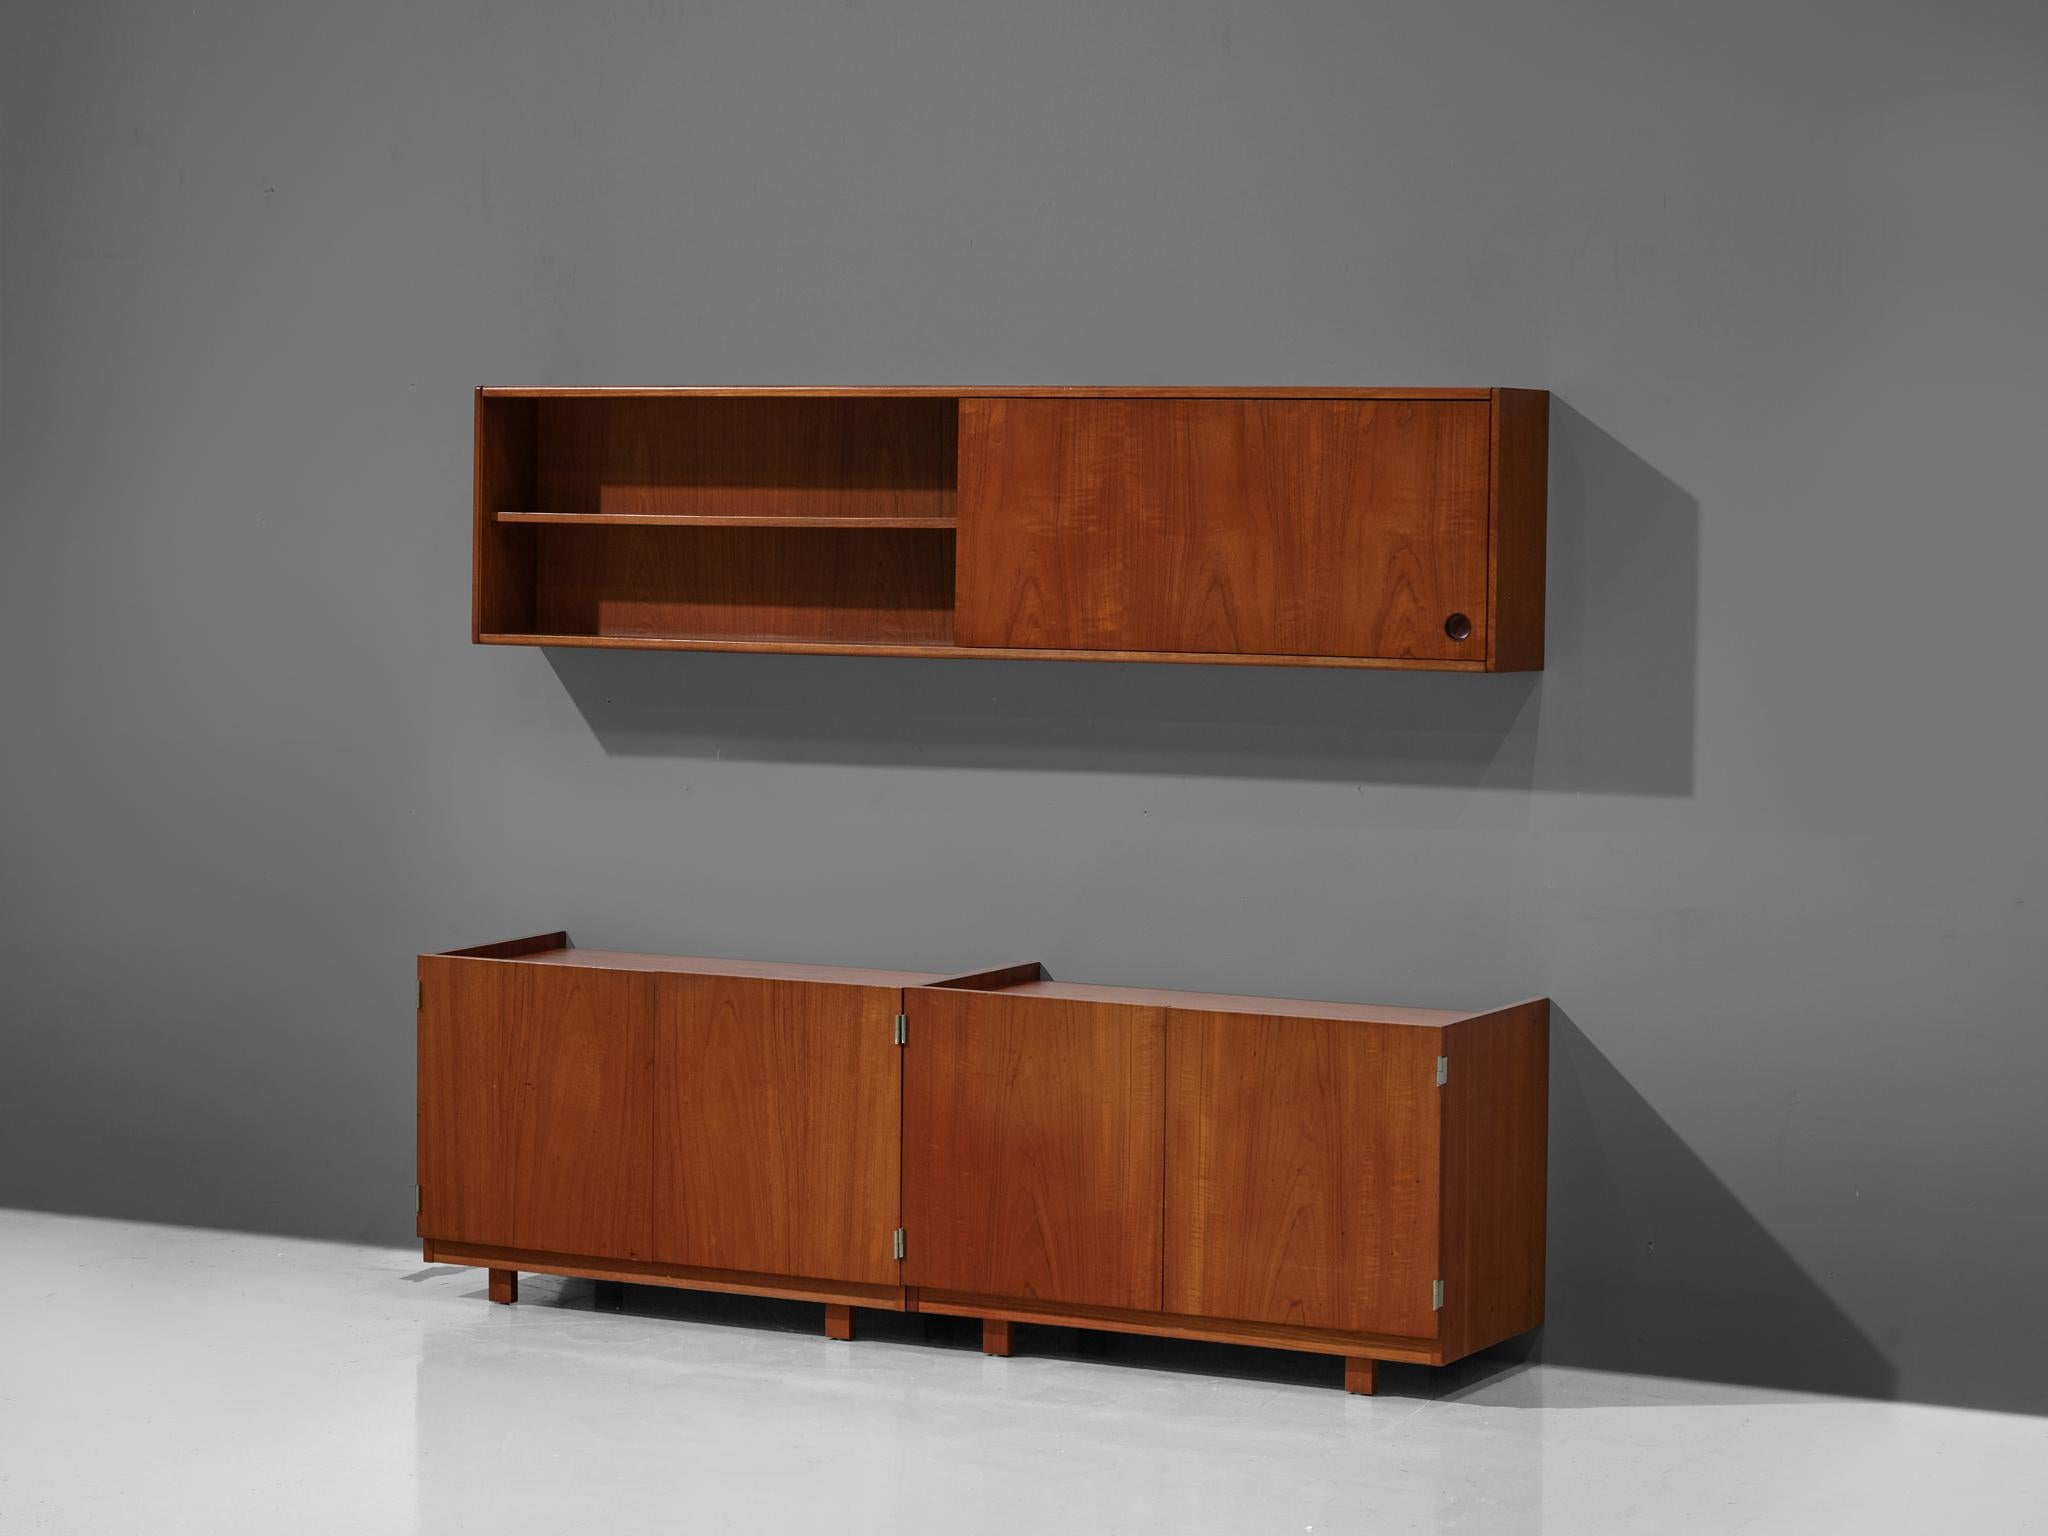 Robert Heritage, set of wall cabinet with two cabinets, teak, United Kingdom, 1960s

This well-executed set by Robert Heritage holds an utterly well-balanced construction concealing a great sense of proportions. The style is characterized by